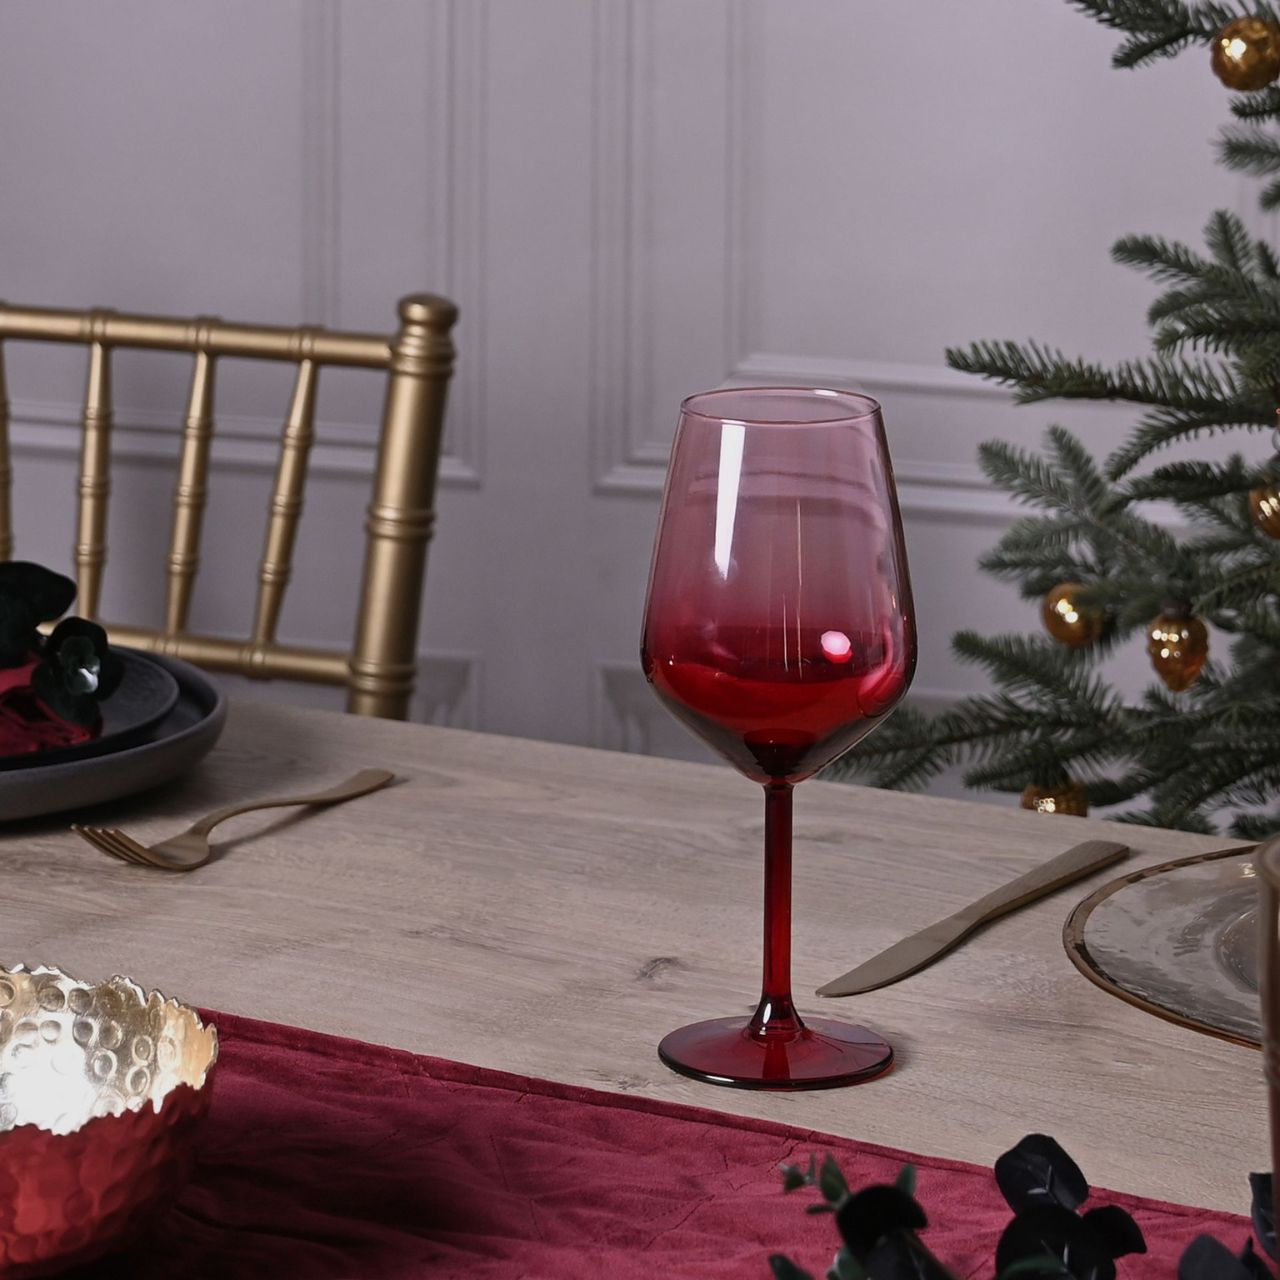 Red Ombre Christmas Wine Glasses  A red ombre wine glass.  This elegant and stylish glassware adds instant modernity to the home.